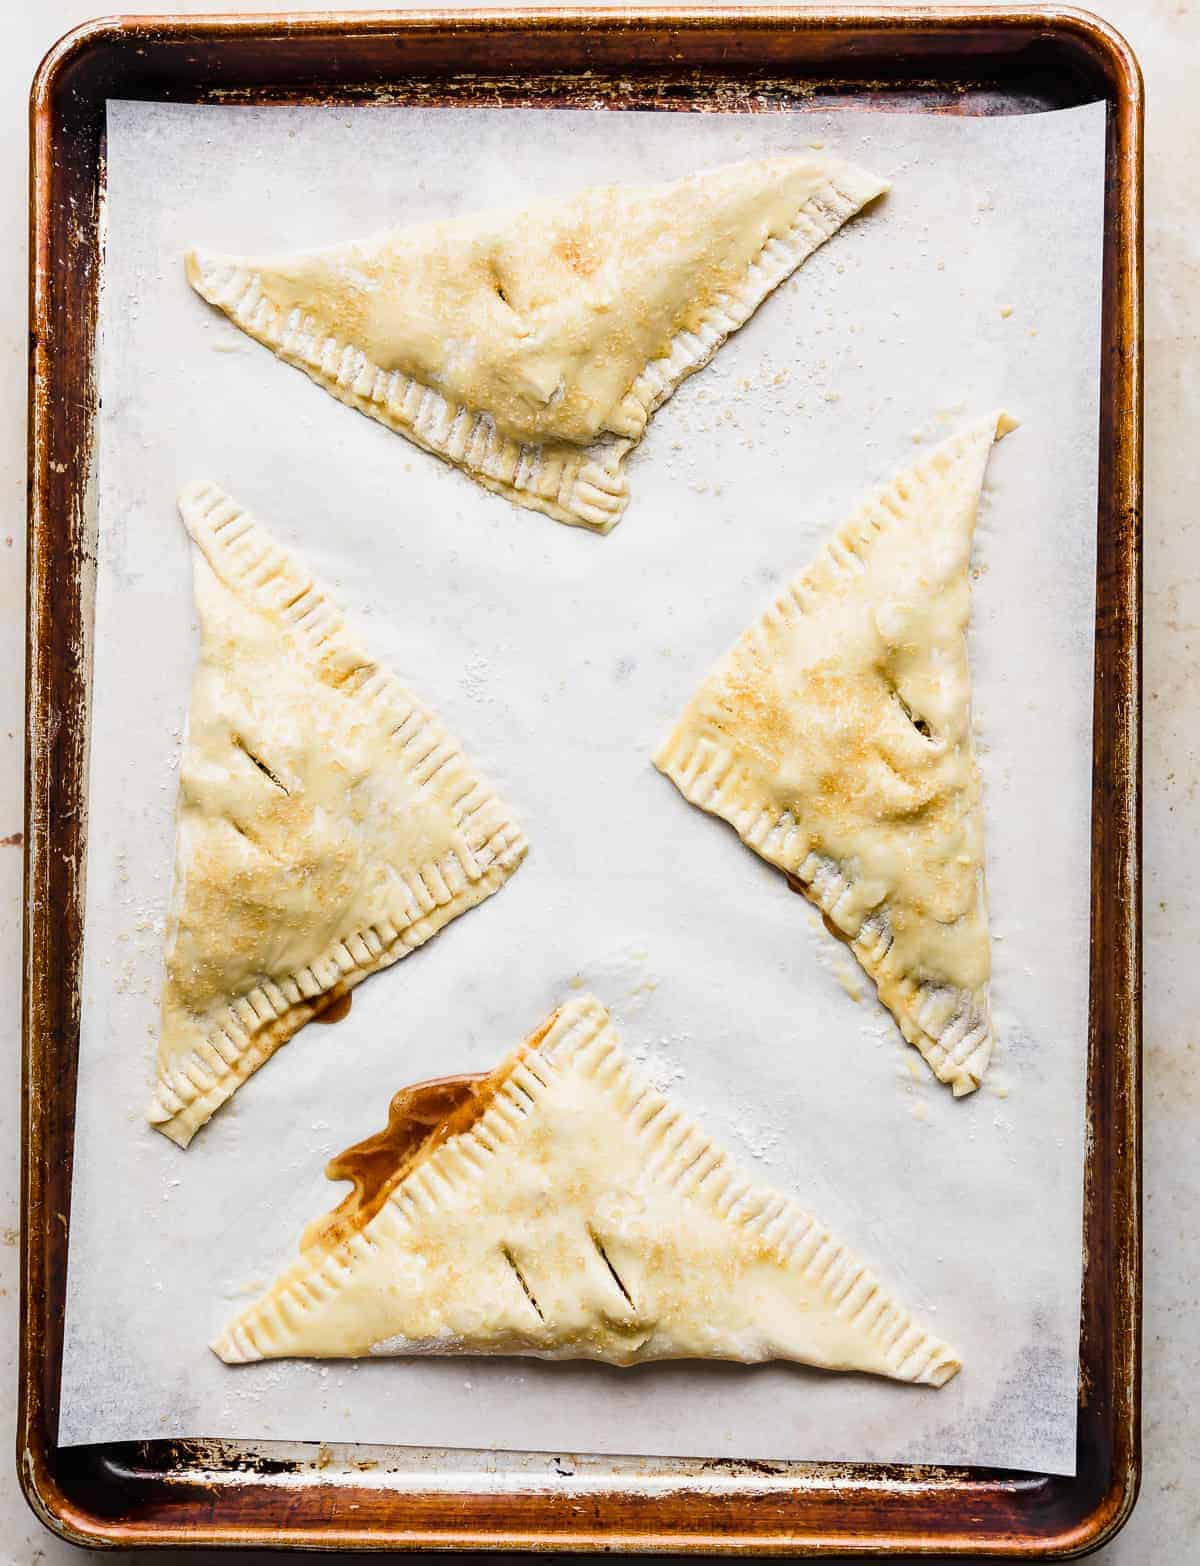 Unbaked Puff Pastry Apple Turnovers on a parchment lined baking sheet.